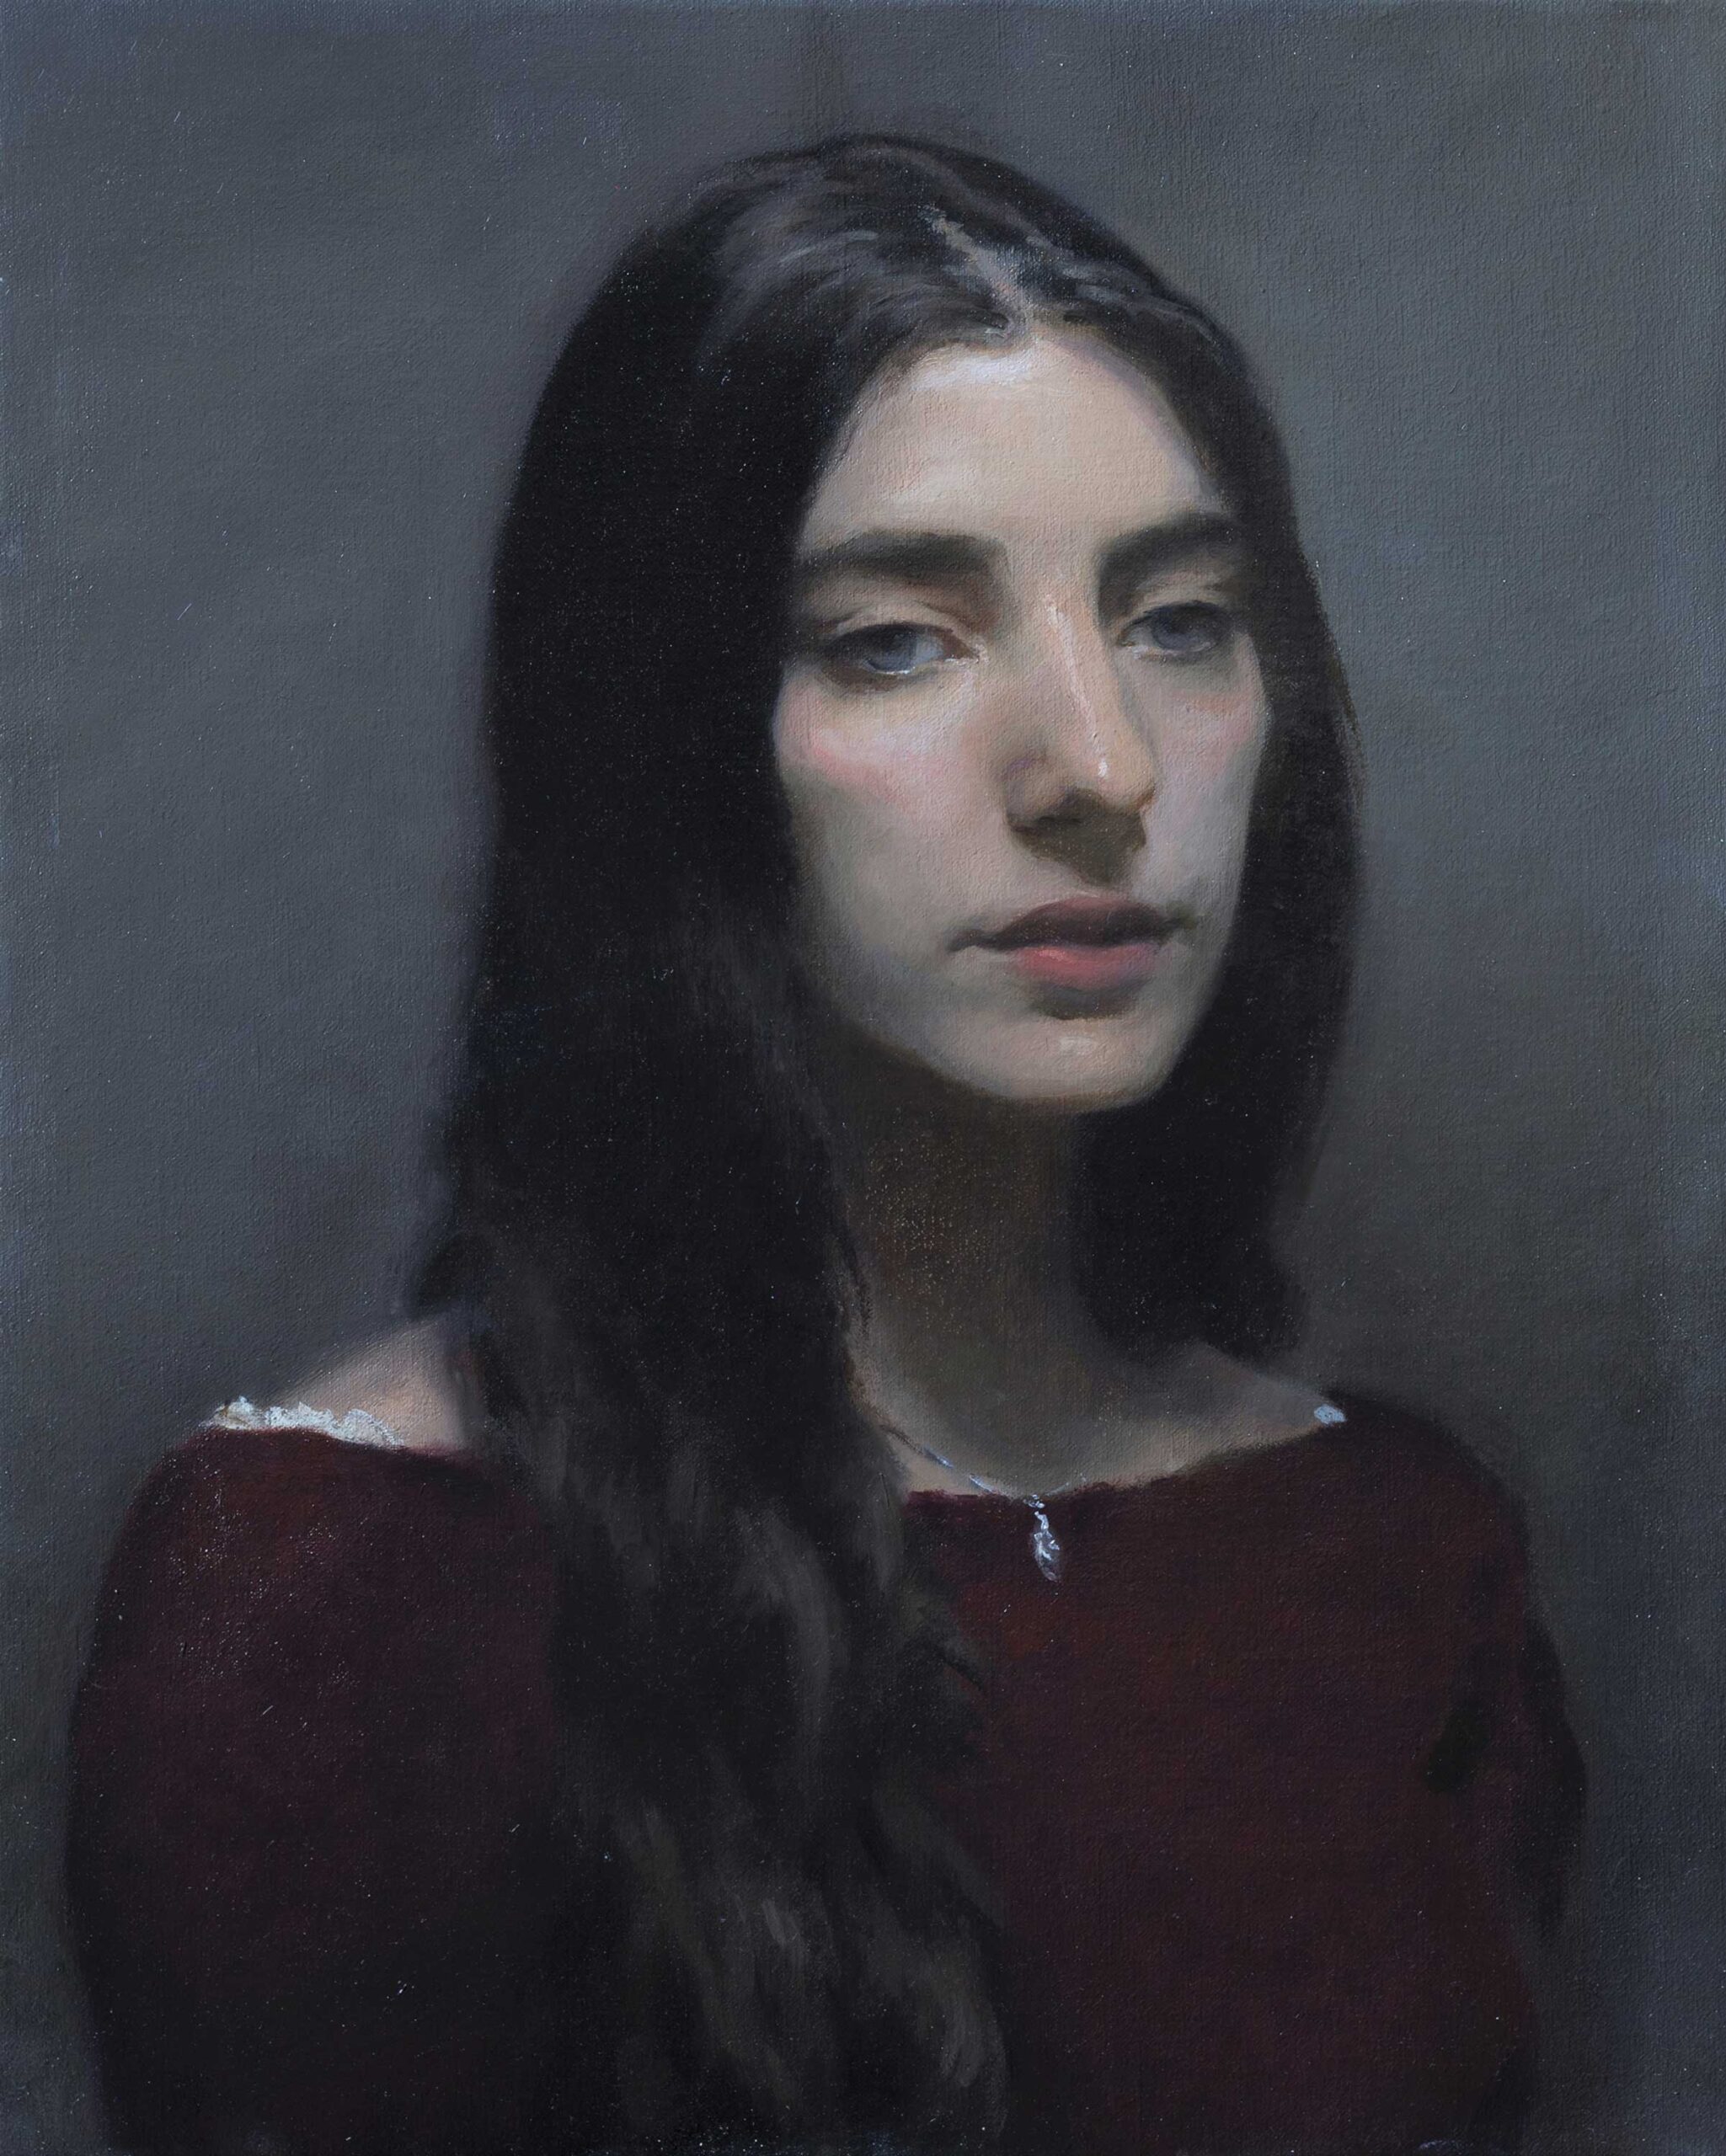 Florence Academy of Art / Tom Richards, "Italian Girl," 2020, oil on canvas, 20 x 16 in., available through the artist